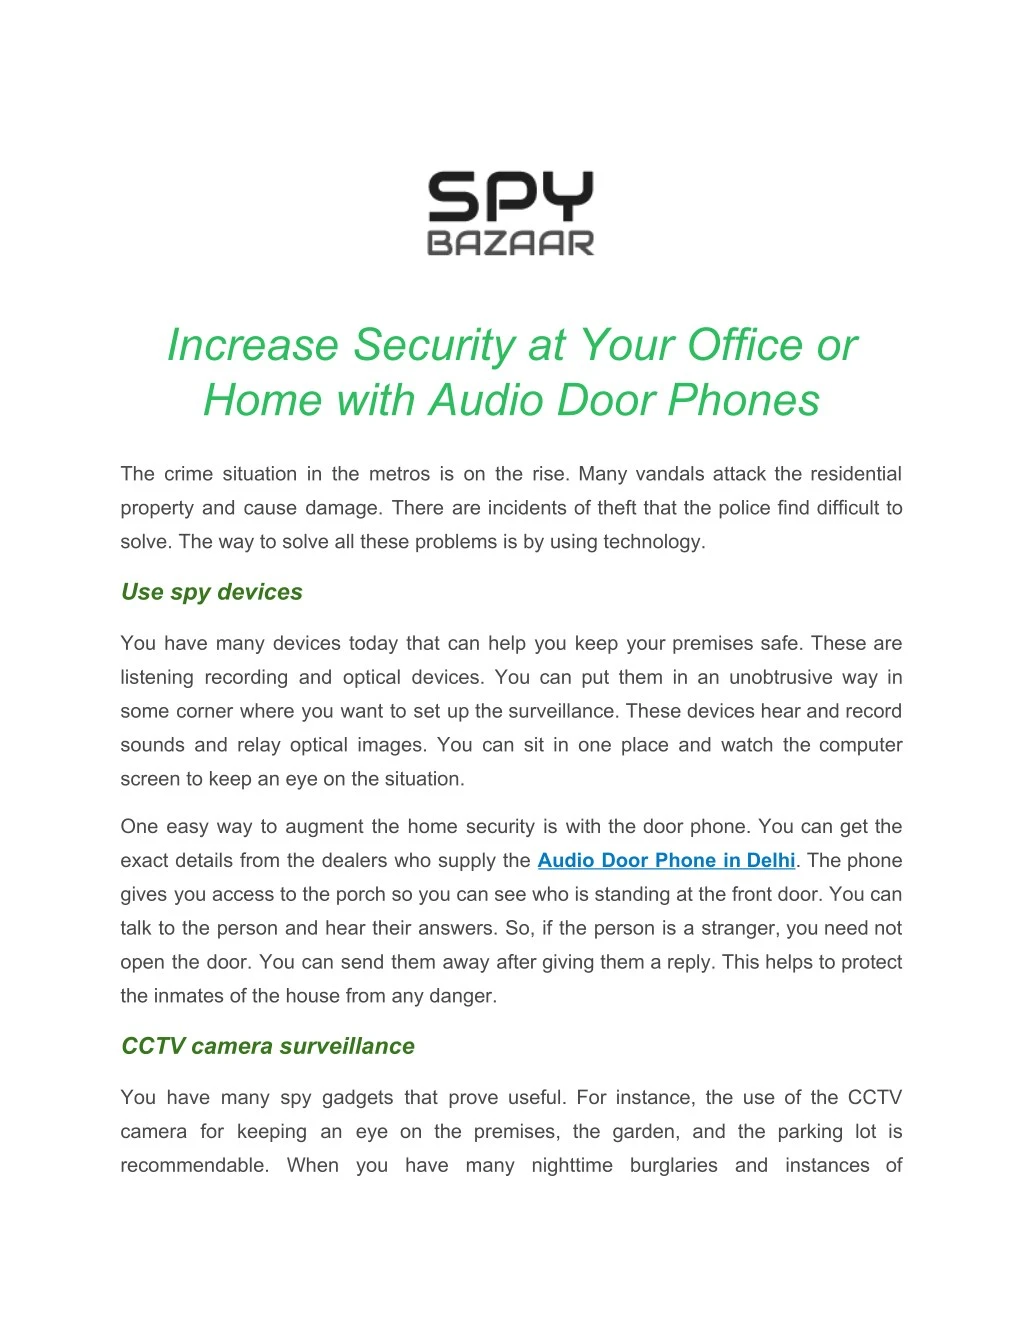 increase security at your office or home with